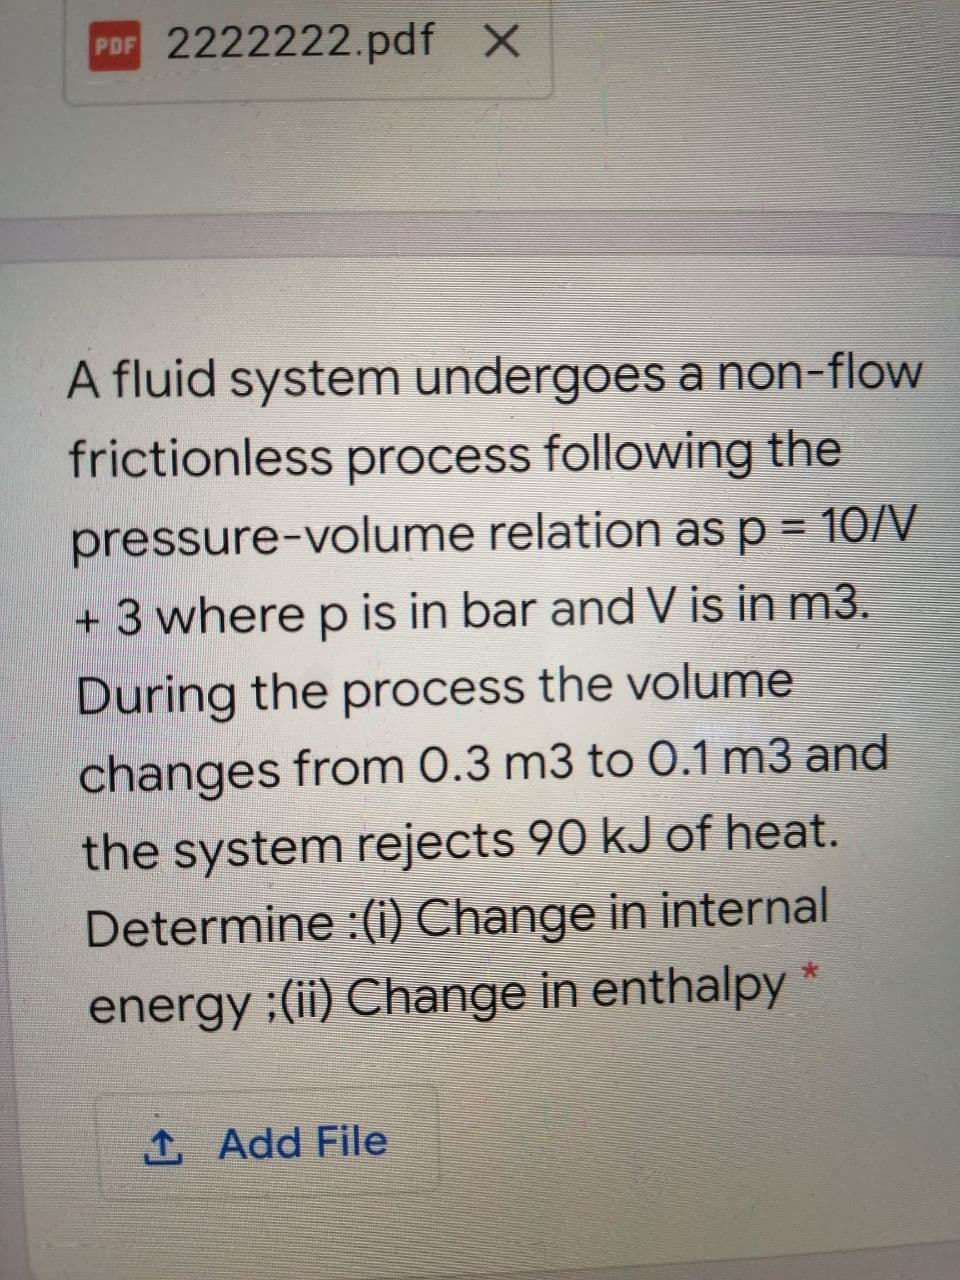 PDF 2222222.pdf X
A fluid system undergoes a non-flow
frictionless process following the
pressure-volume relation as p = 10/V
+ 3 where p is in bar and V is in m3.
During the process the volume
changes from 0.3 m3 to 0.1 m3 and
the system rejects 90 kJ of heat.
Determine :(i) Change in internal
大
energy :(ii) Change in enthalpy
1 Add File
